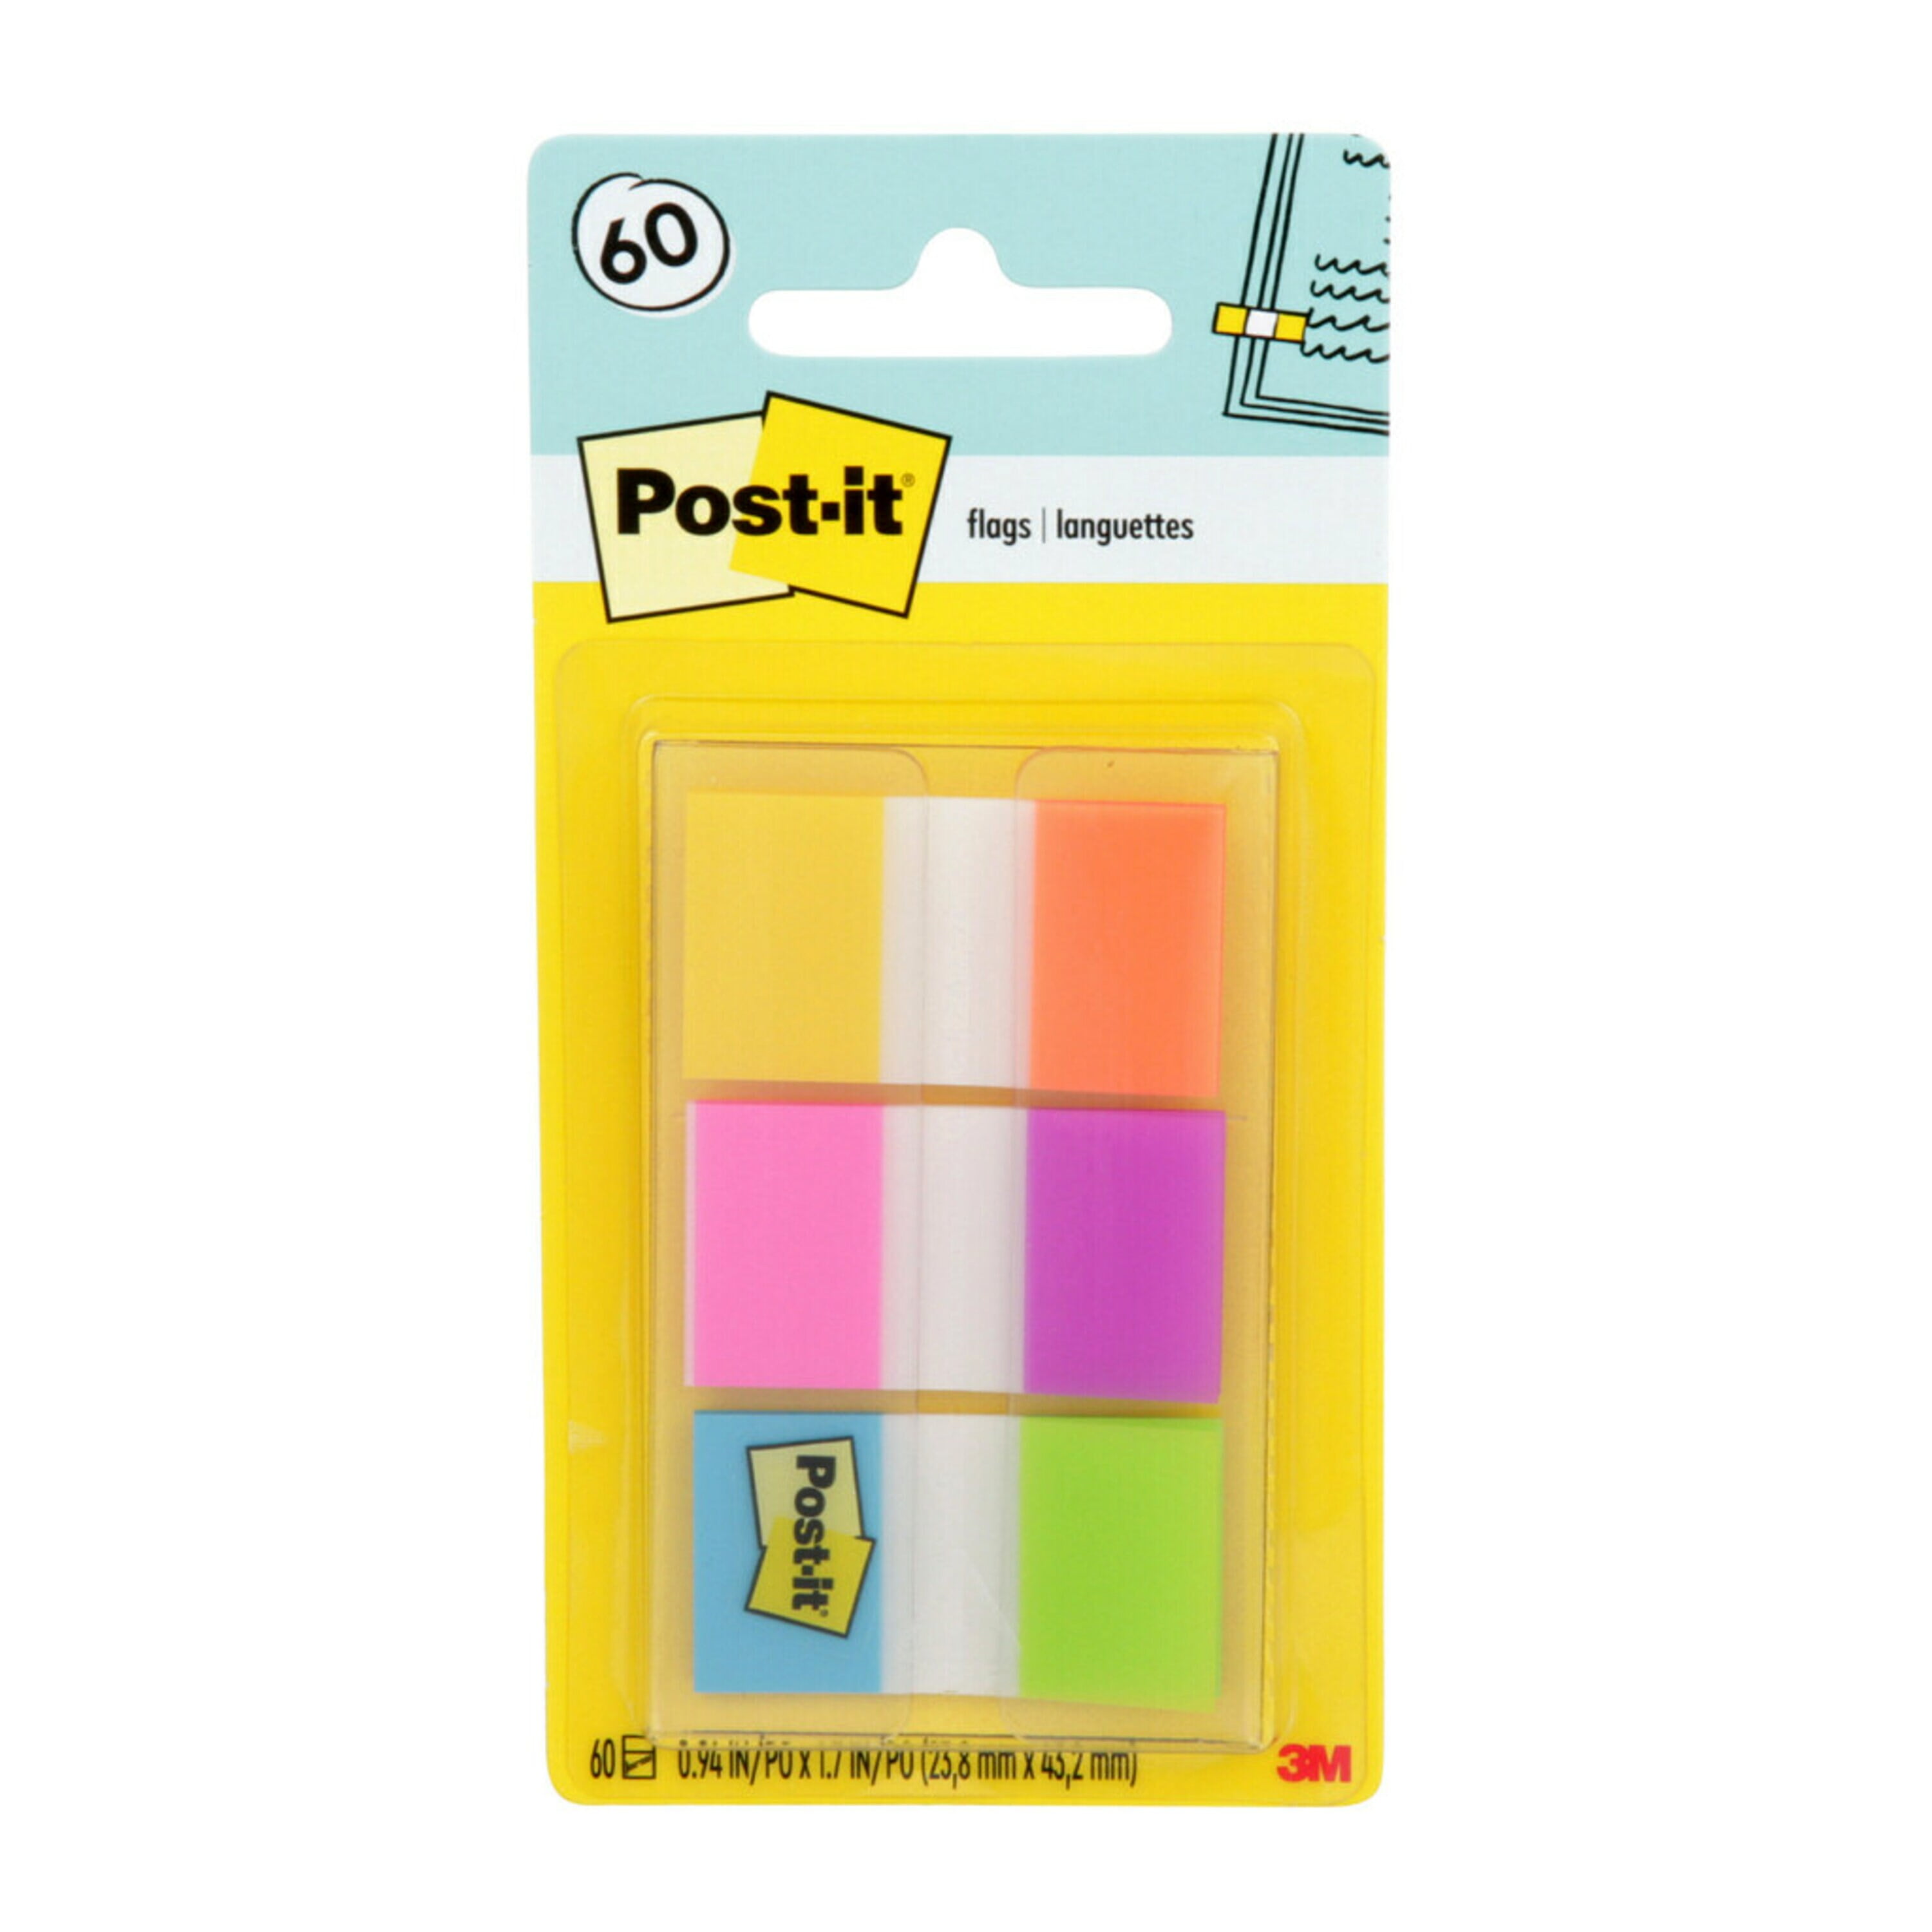 Post-it Self-Stick Easel Pads, Yellow, 25 x 30, 2 Pads 